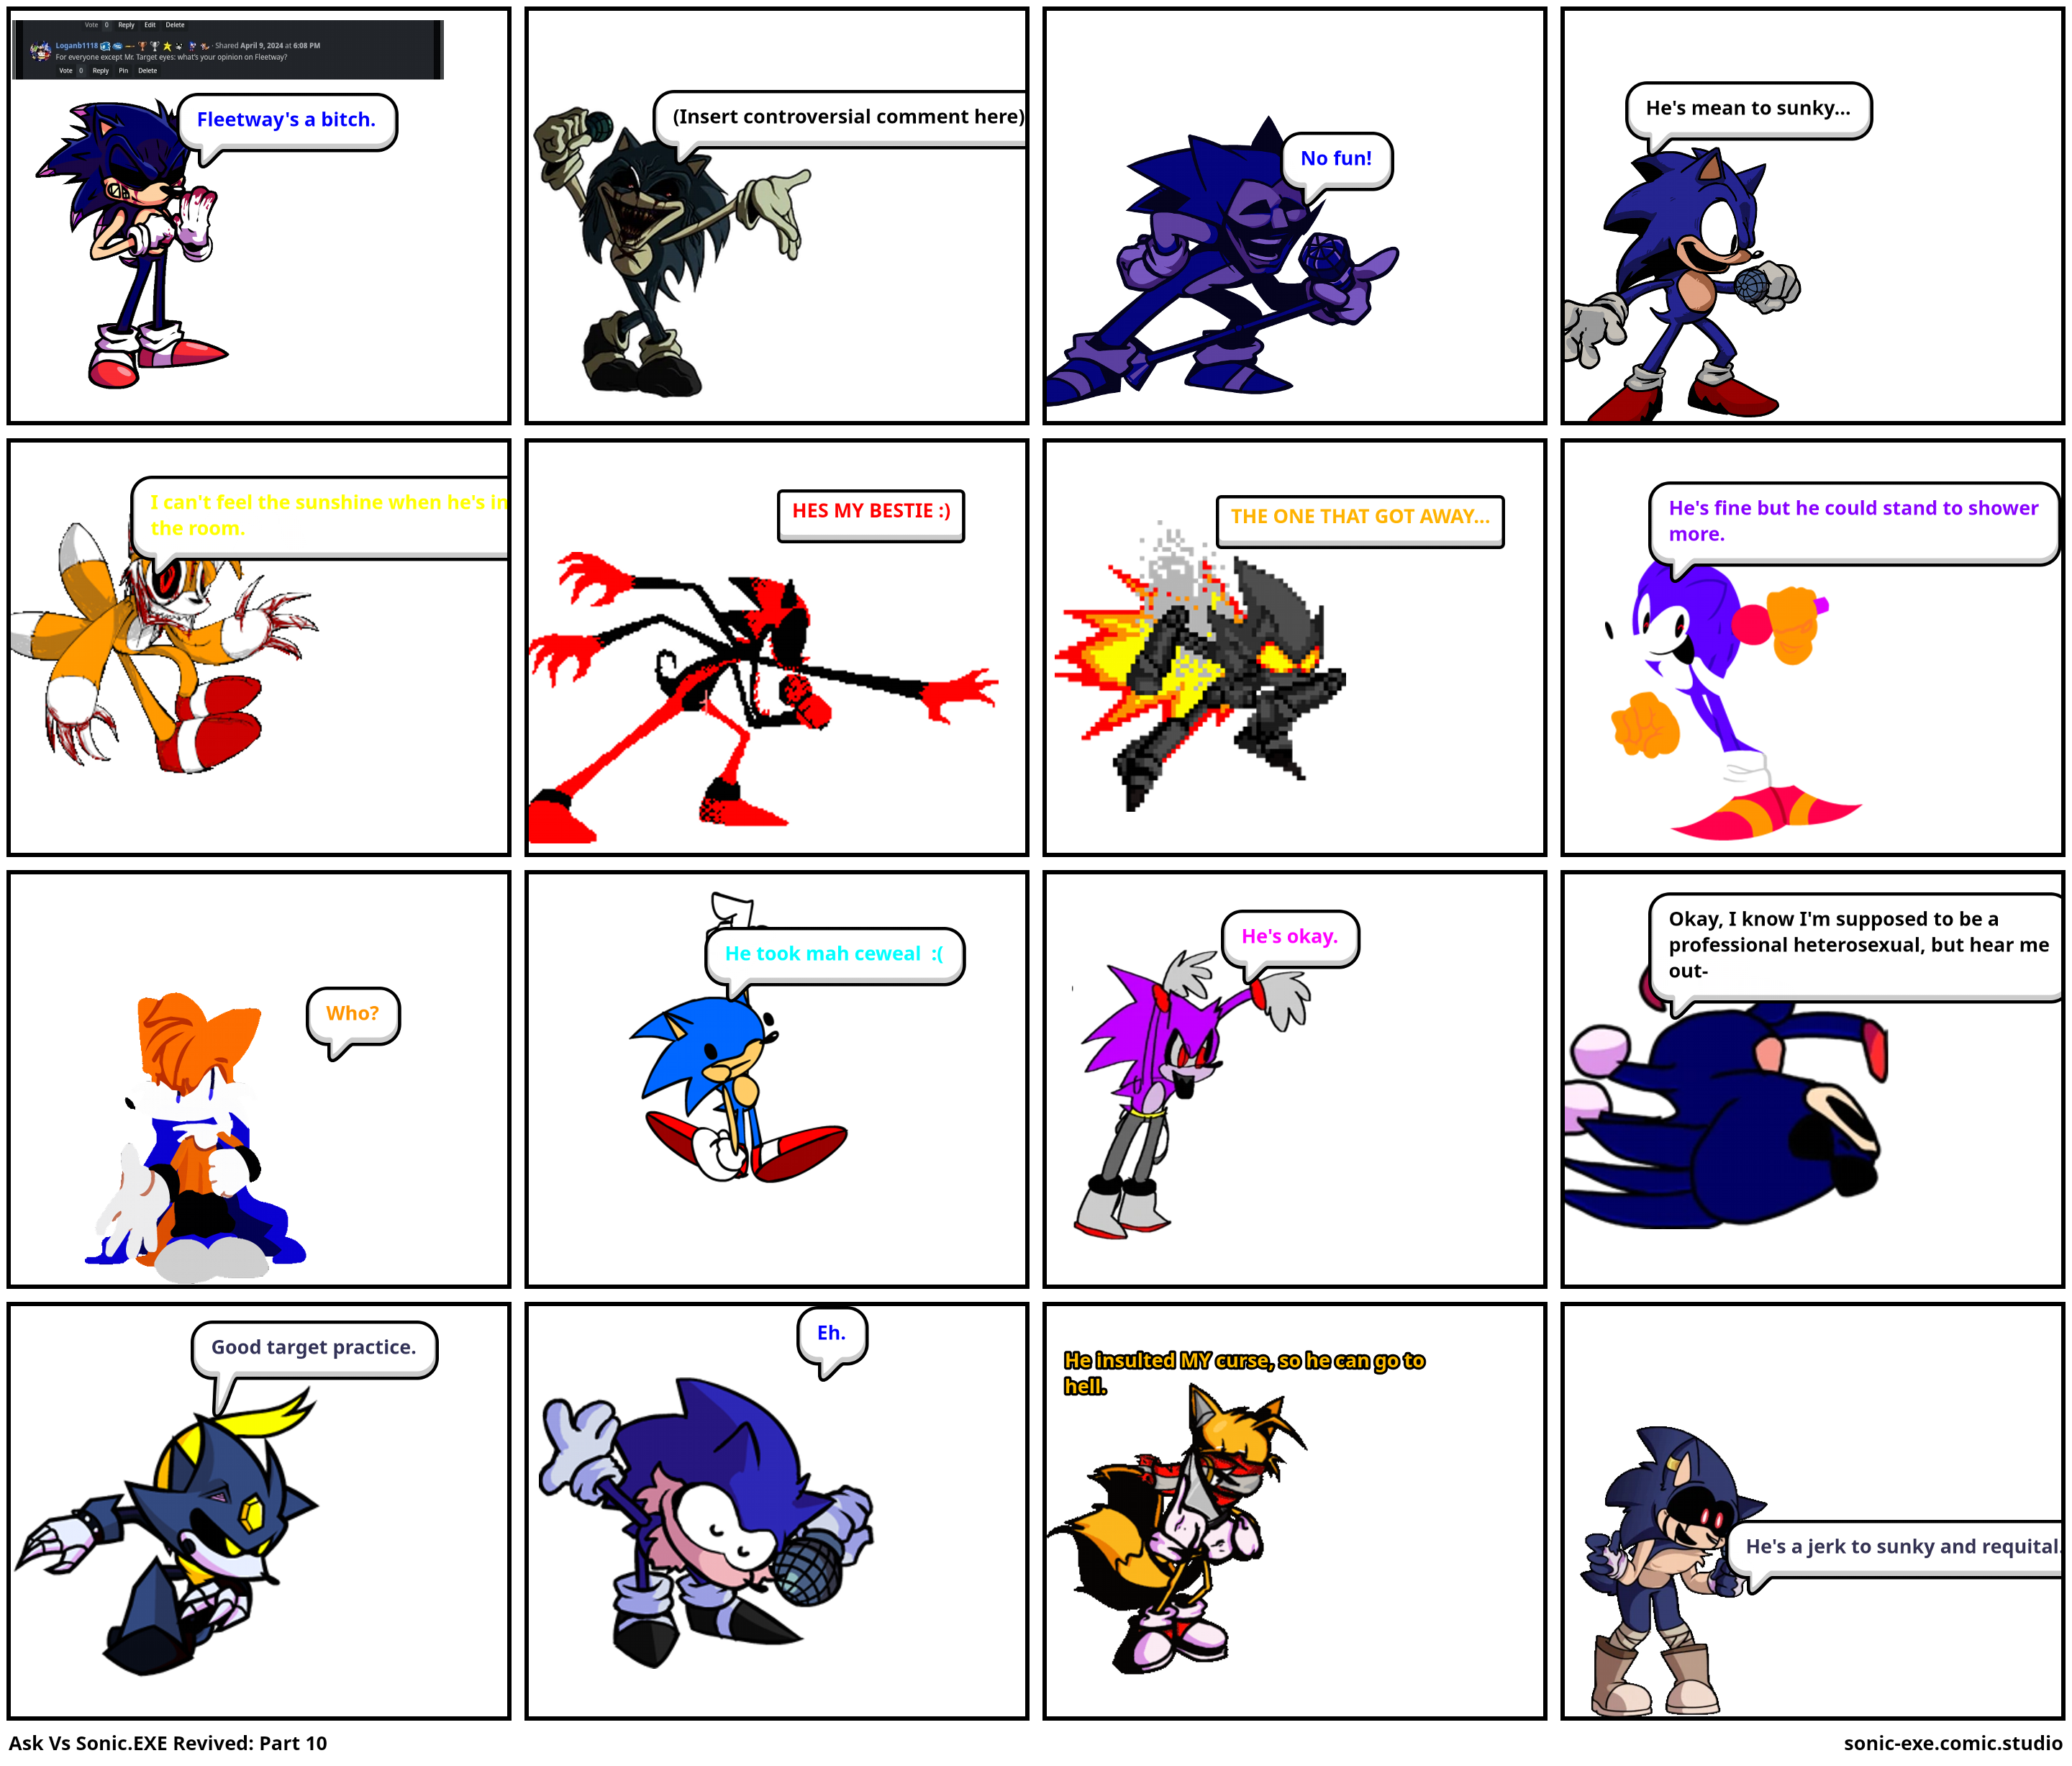 Ask Vs Sonic.EXE Revived: Part 10